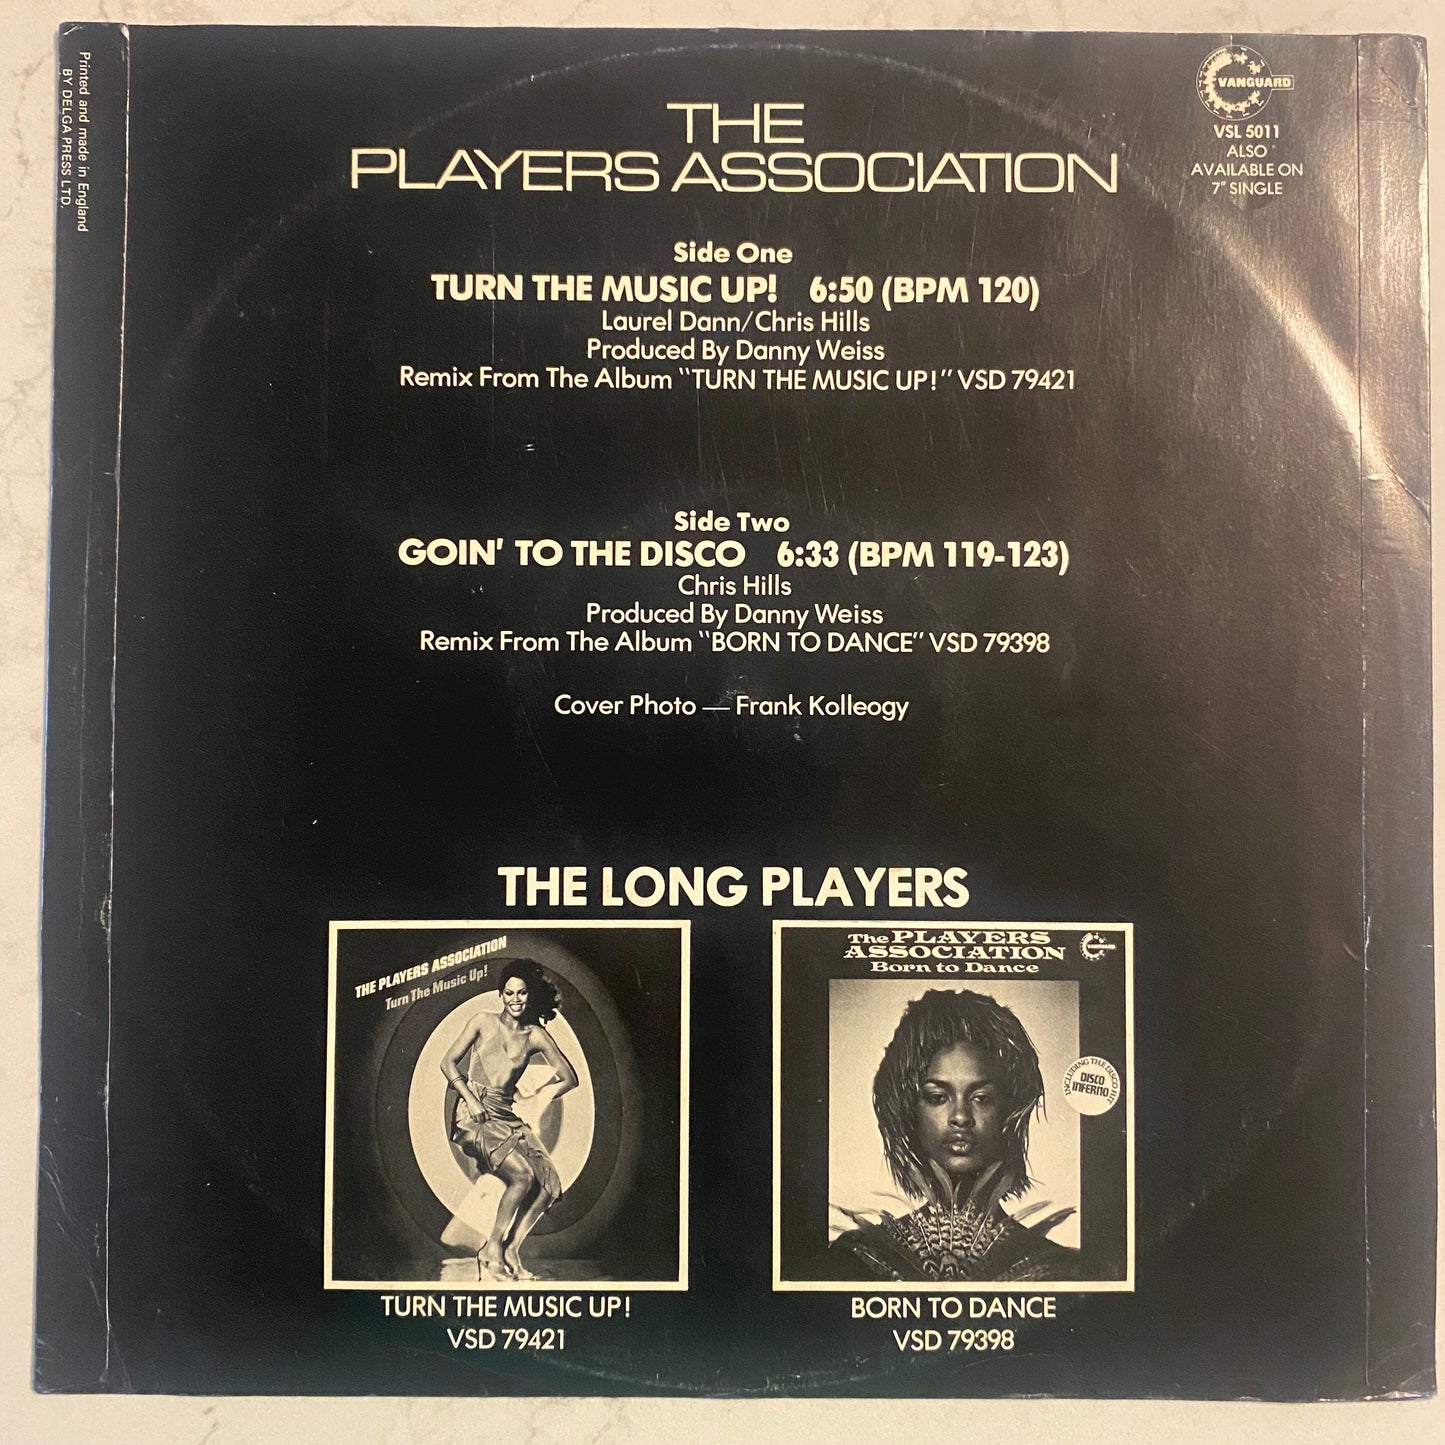 The Players Association - Turn The Music Up! (12", Single) (L)